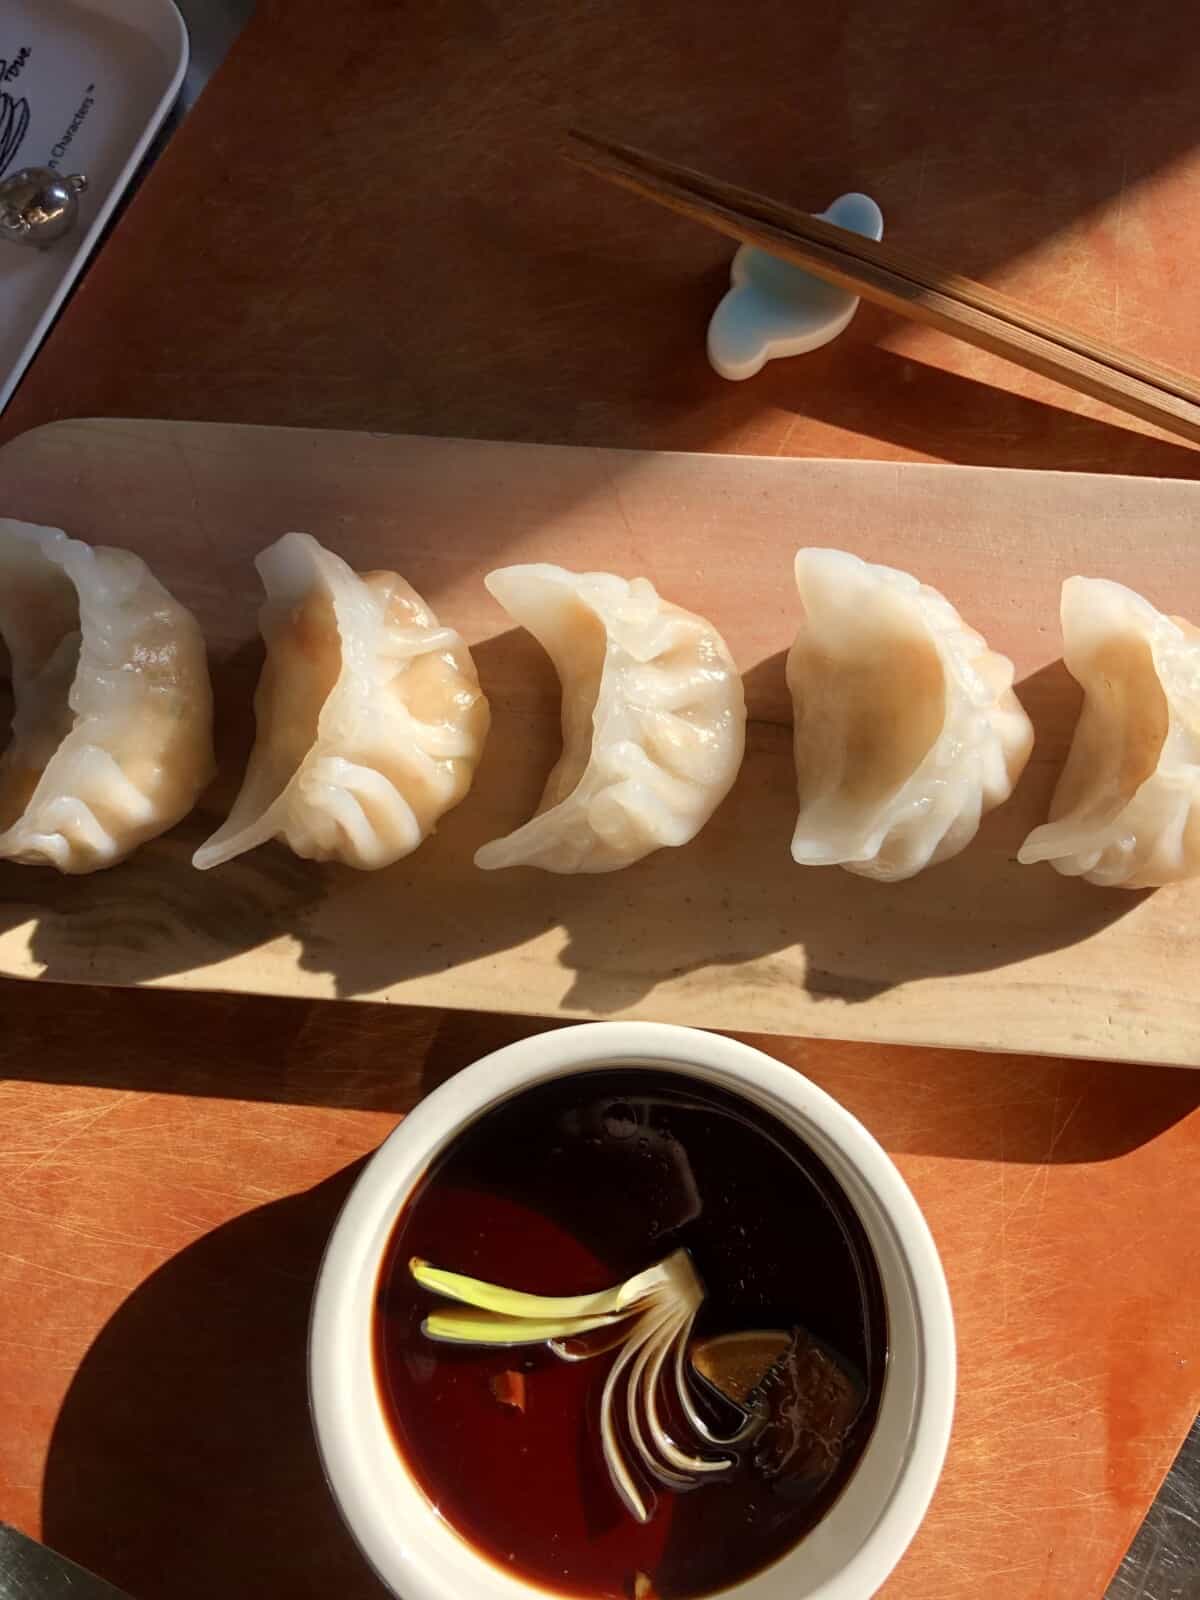 a pink marble platter with 5 har goa dumplings lined up on it and a side of dumpling dipping sauce with a flowered scallion and sliced ginger to flavor it